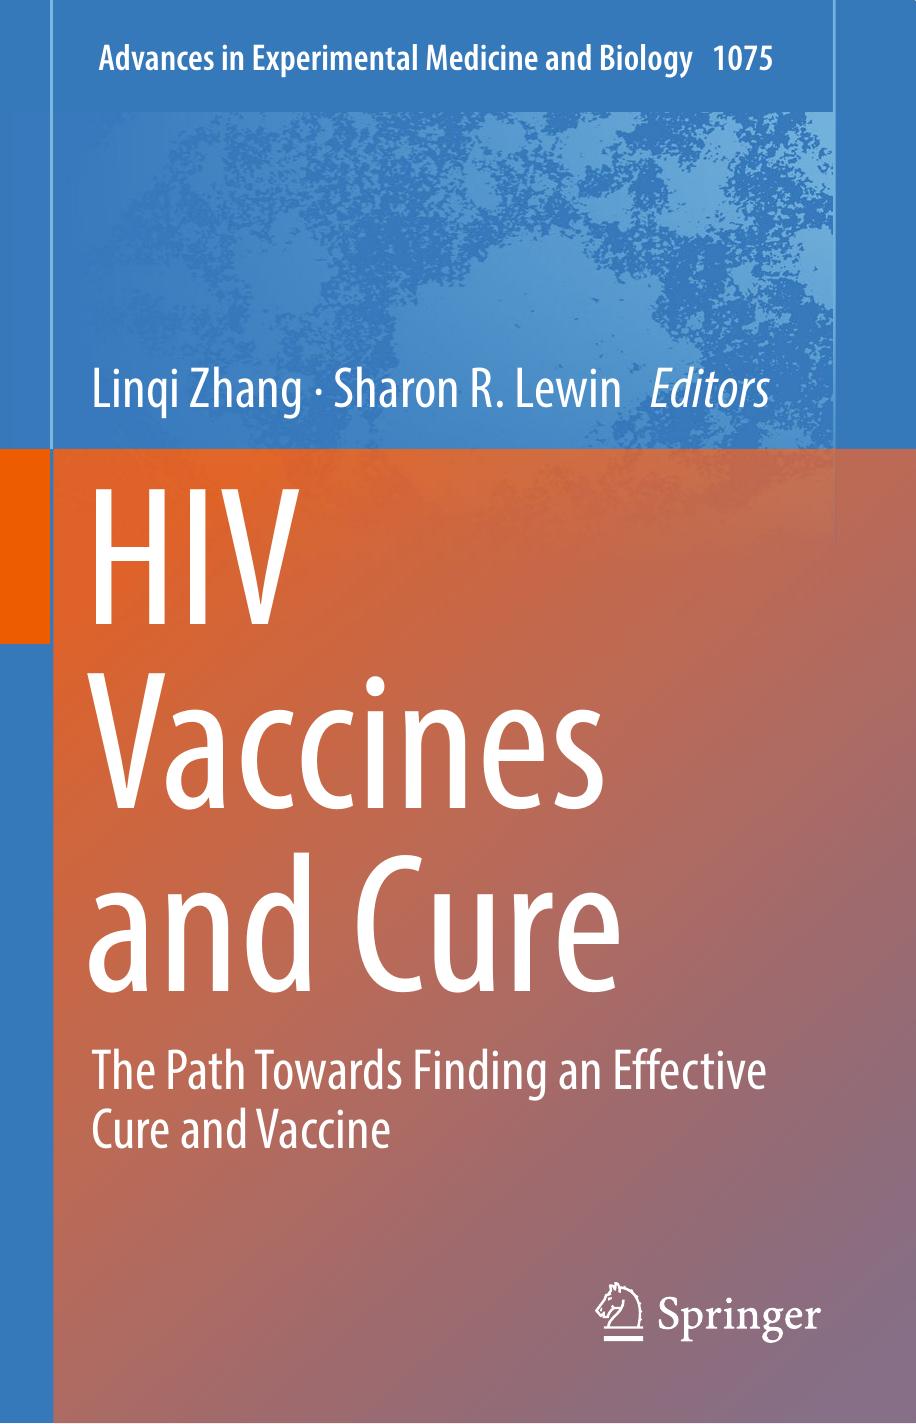 HIV Vaccines and Cure 2018.pdf